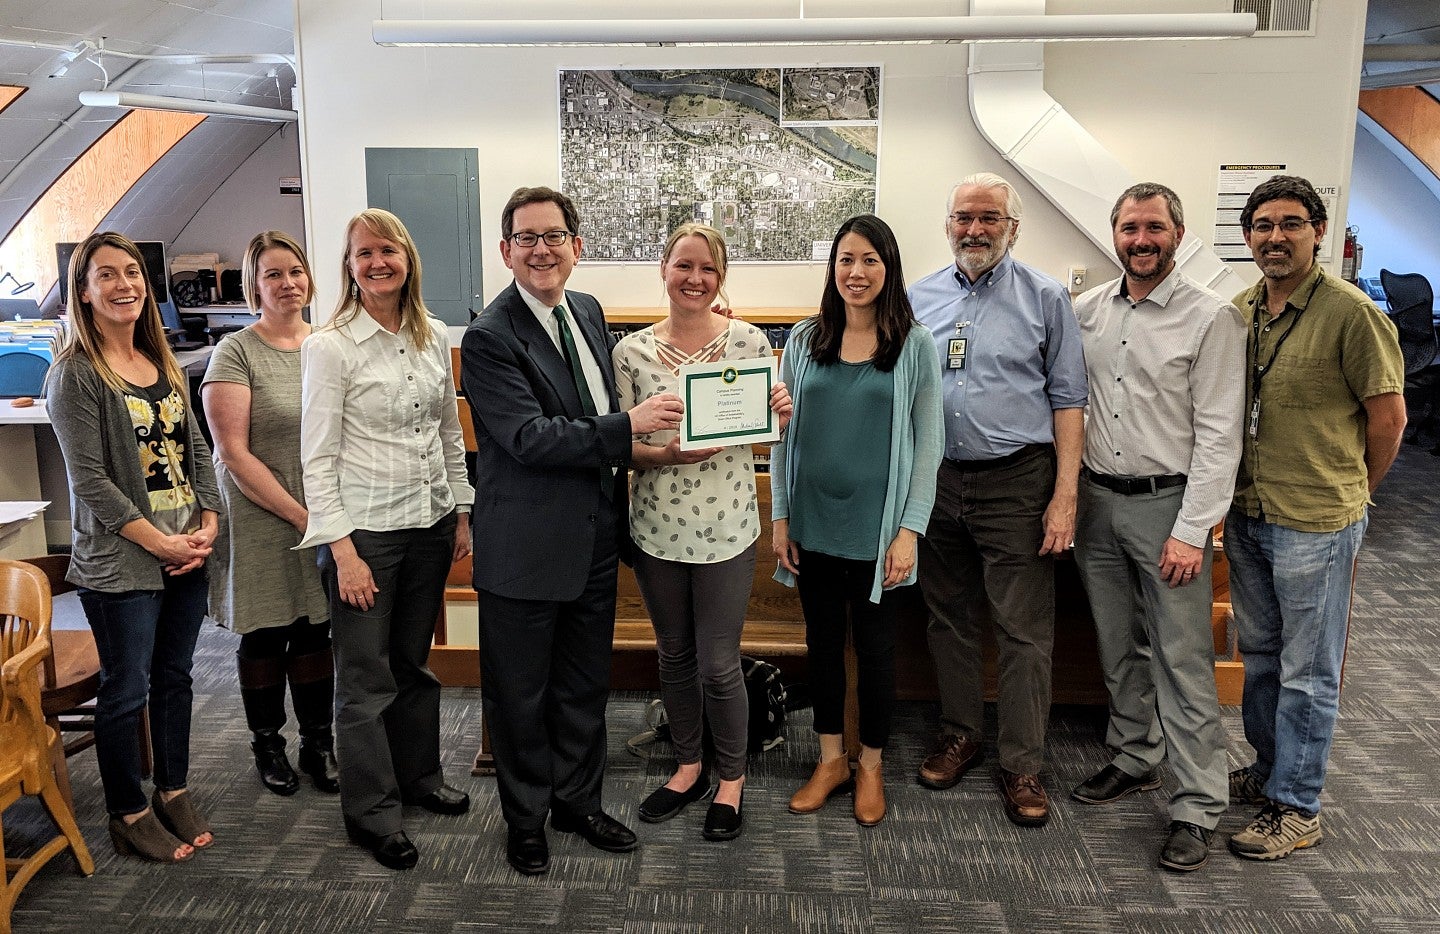 Campus Planning staff receive their award from UO President Michael Schill